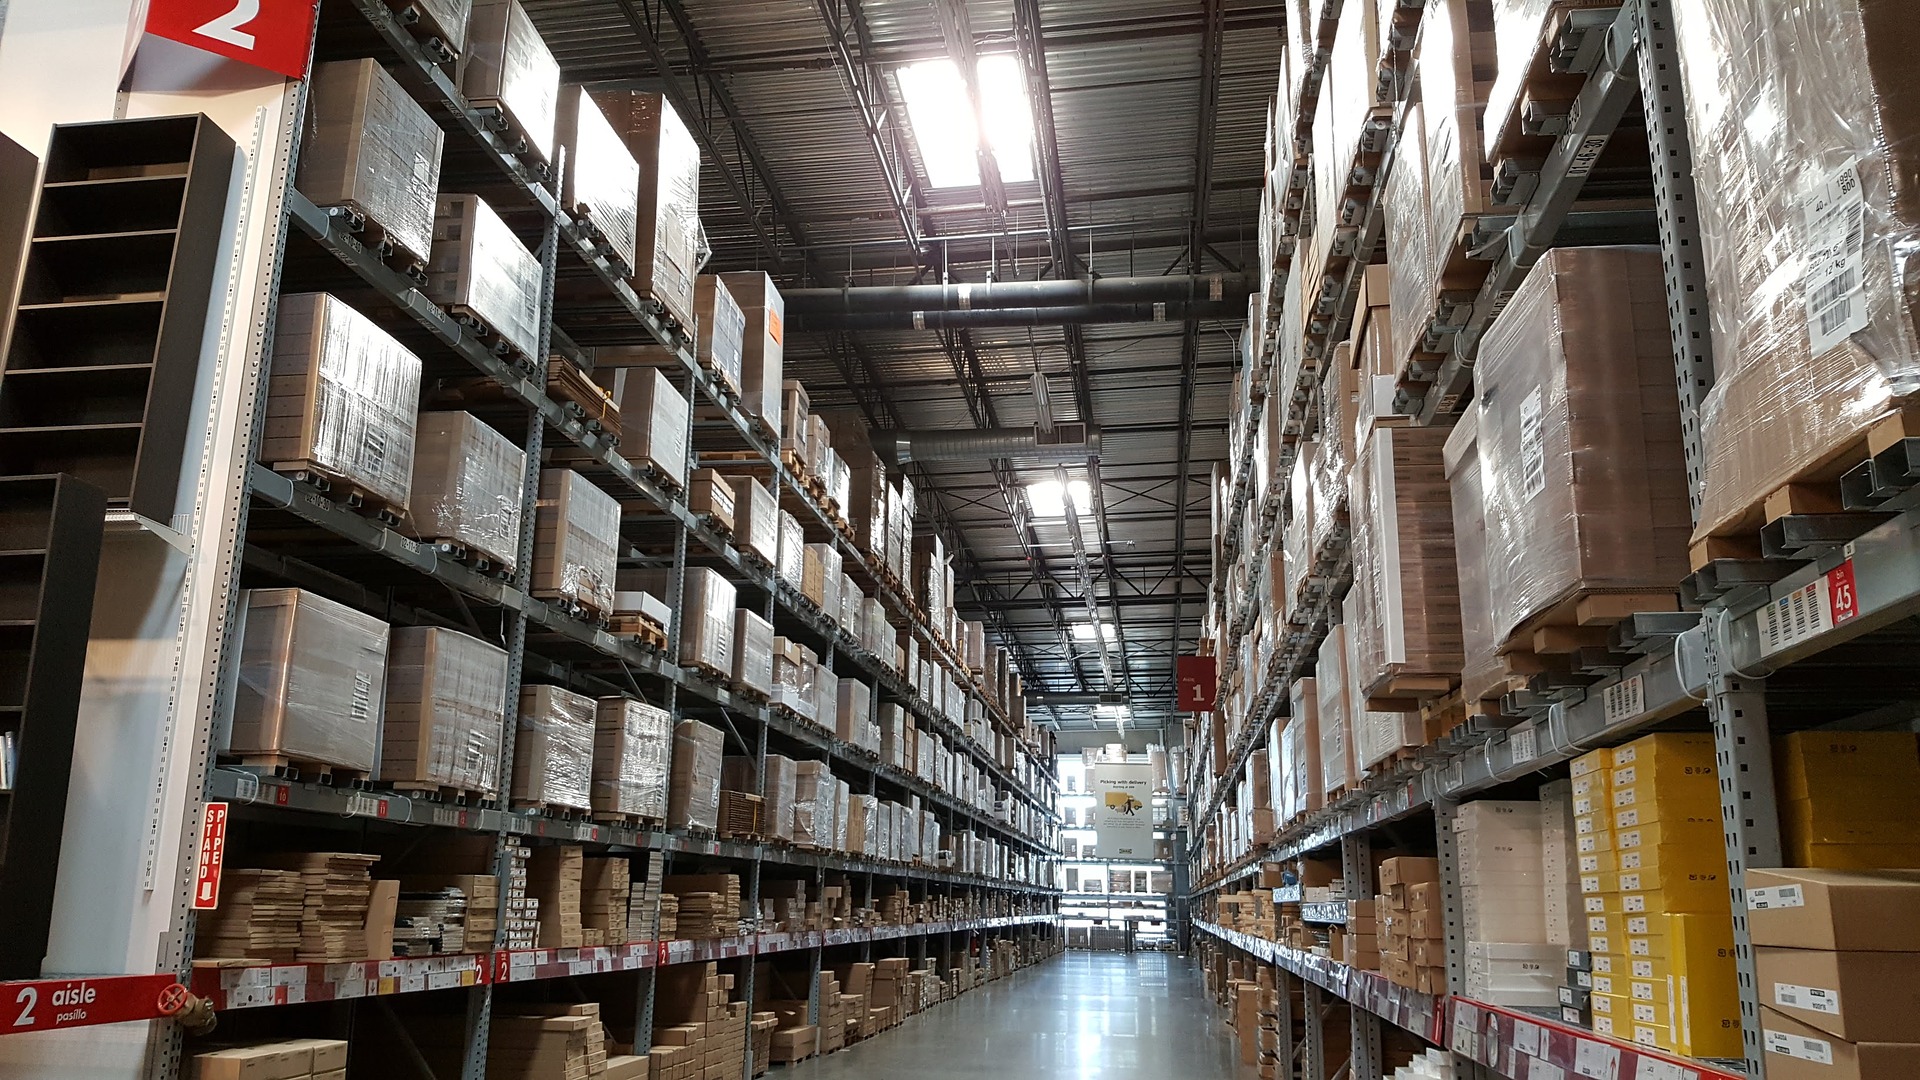 Inside the High-Tech Watch: How Amazon and Walmart Keep Tabs on Warehouse Workers' Every Move